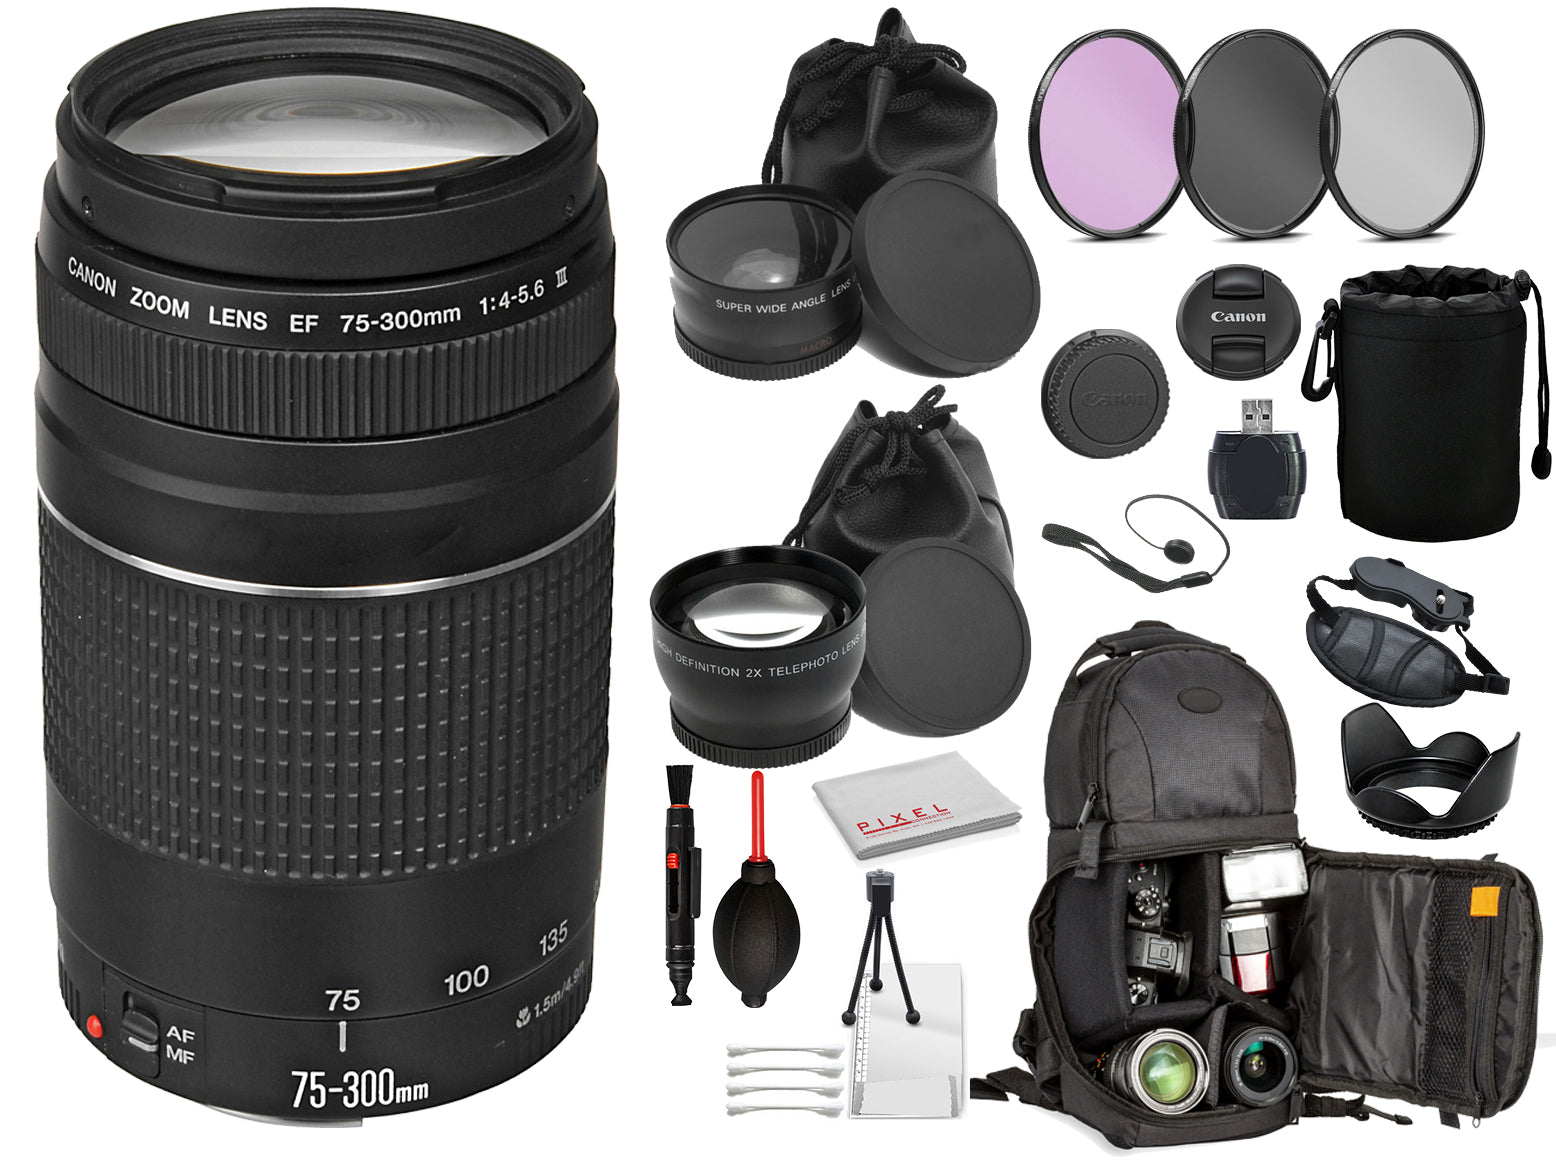 Canon EF 75-300mm f/4-5.6 III Lens (6473A003)  Includes: DSLR Sling Backpack, 3PC filter Kit,  + More